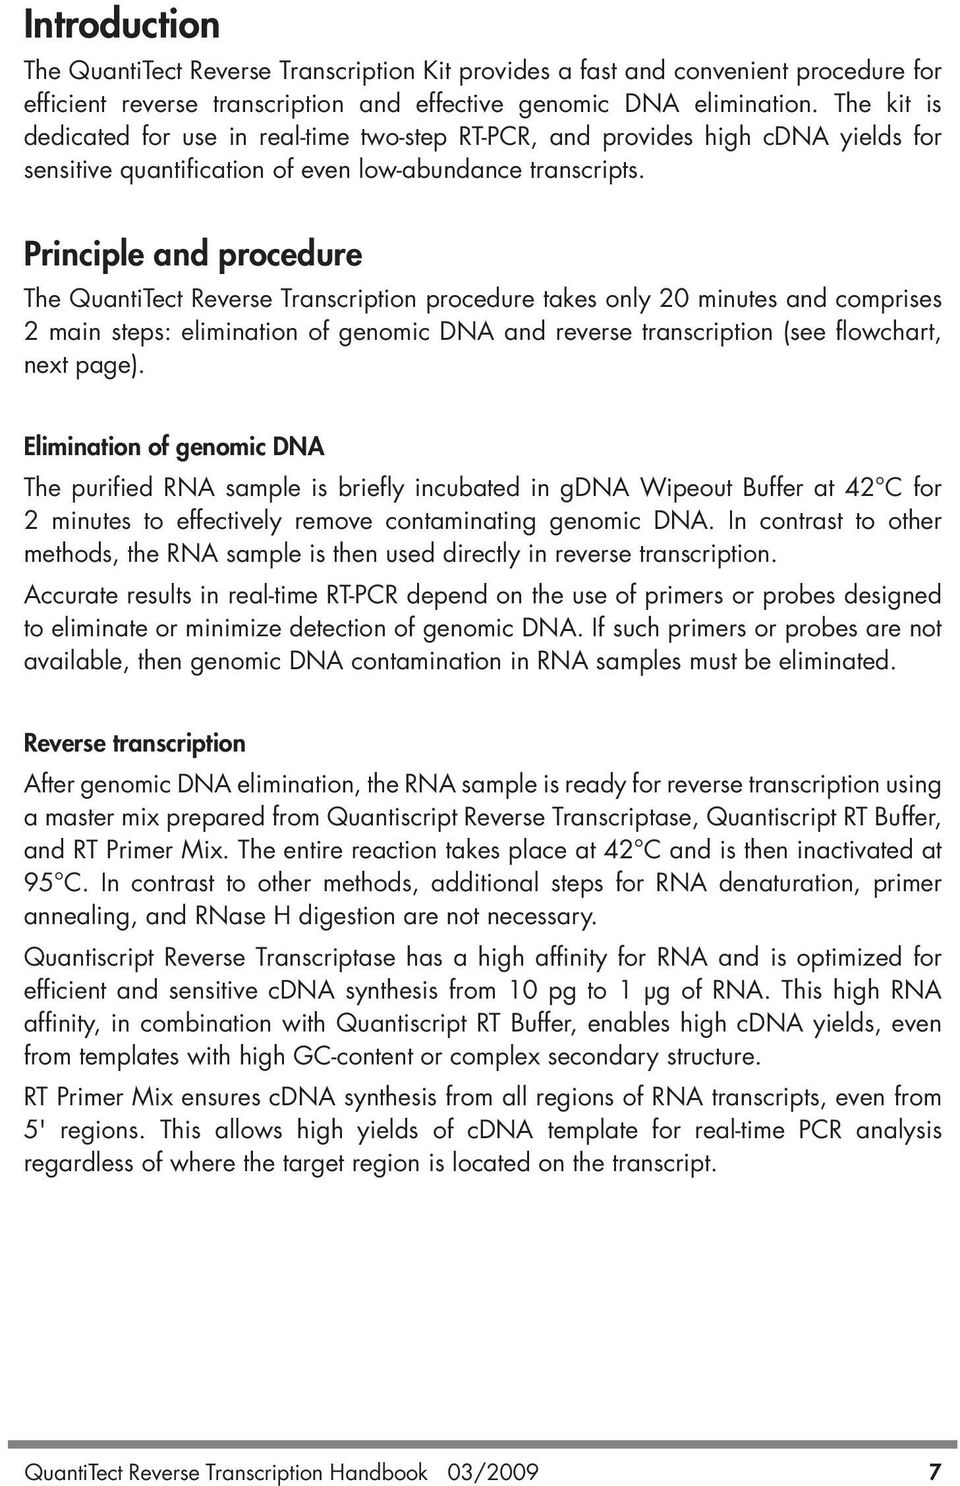 Principle and procedure The QuantiTect Reverse Transcription procedure takes only 20 minutes and comprises 2 main steps: elimination of genomic DNA and reverse transcription (see flowchart, next